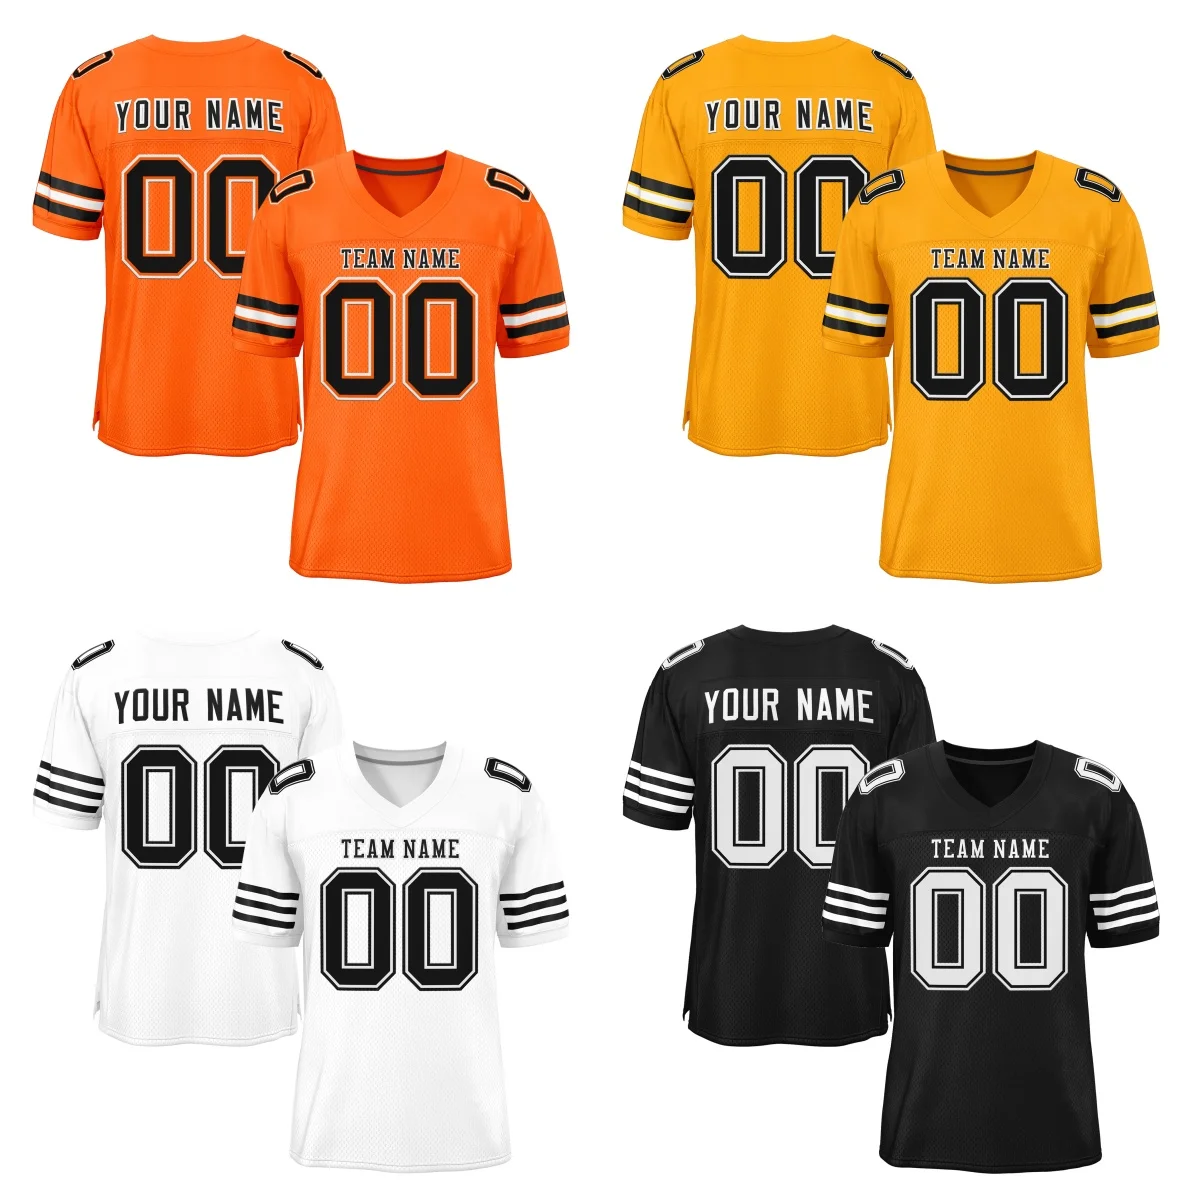 

Custom Men Women Youth Varsity Football Jersey Printed Any Name and Number Football Practice Uniform